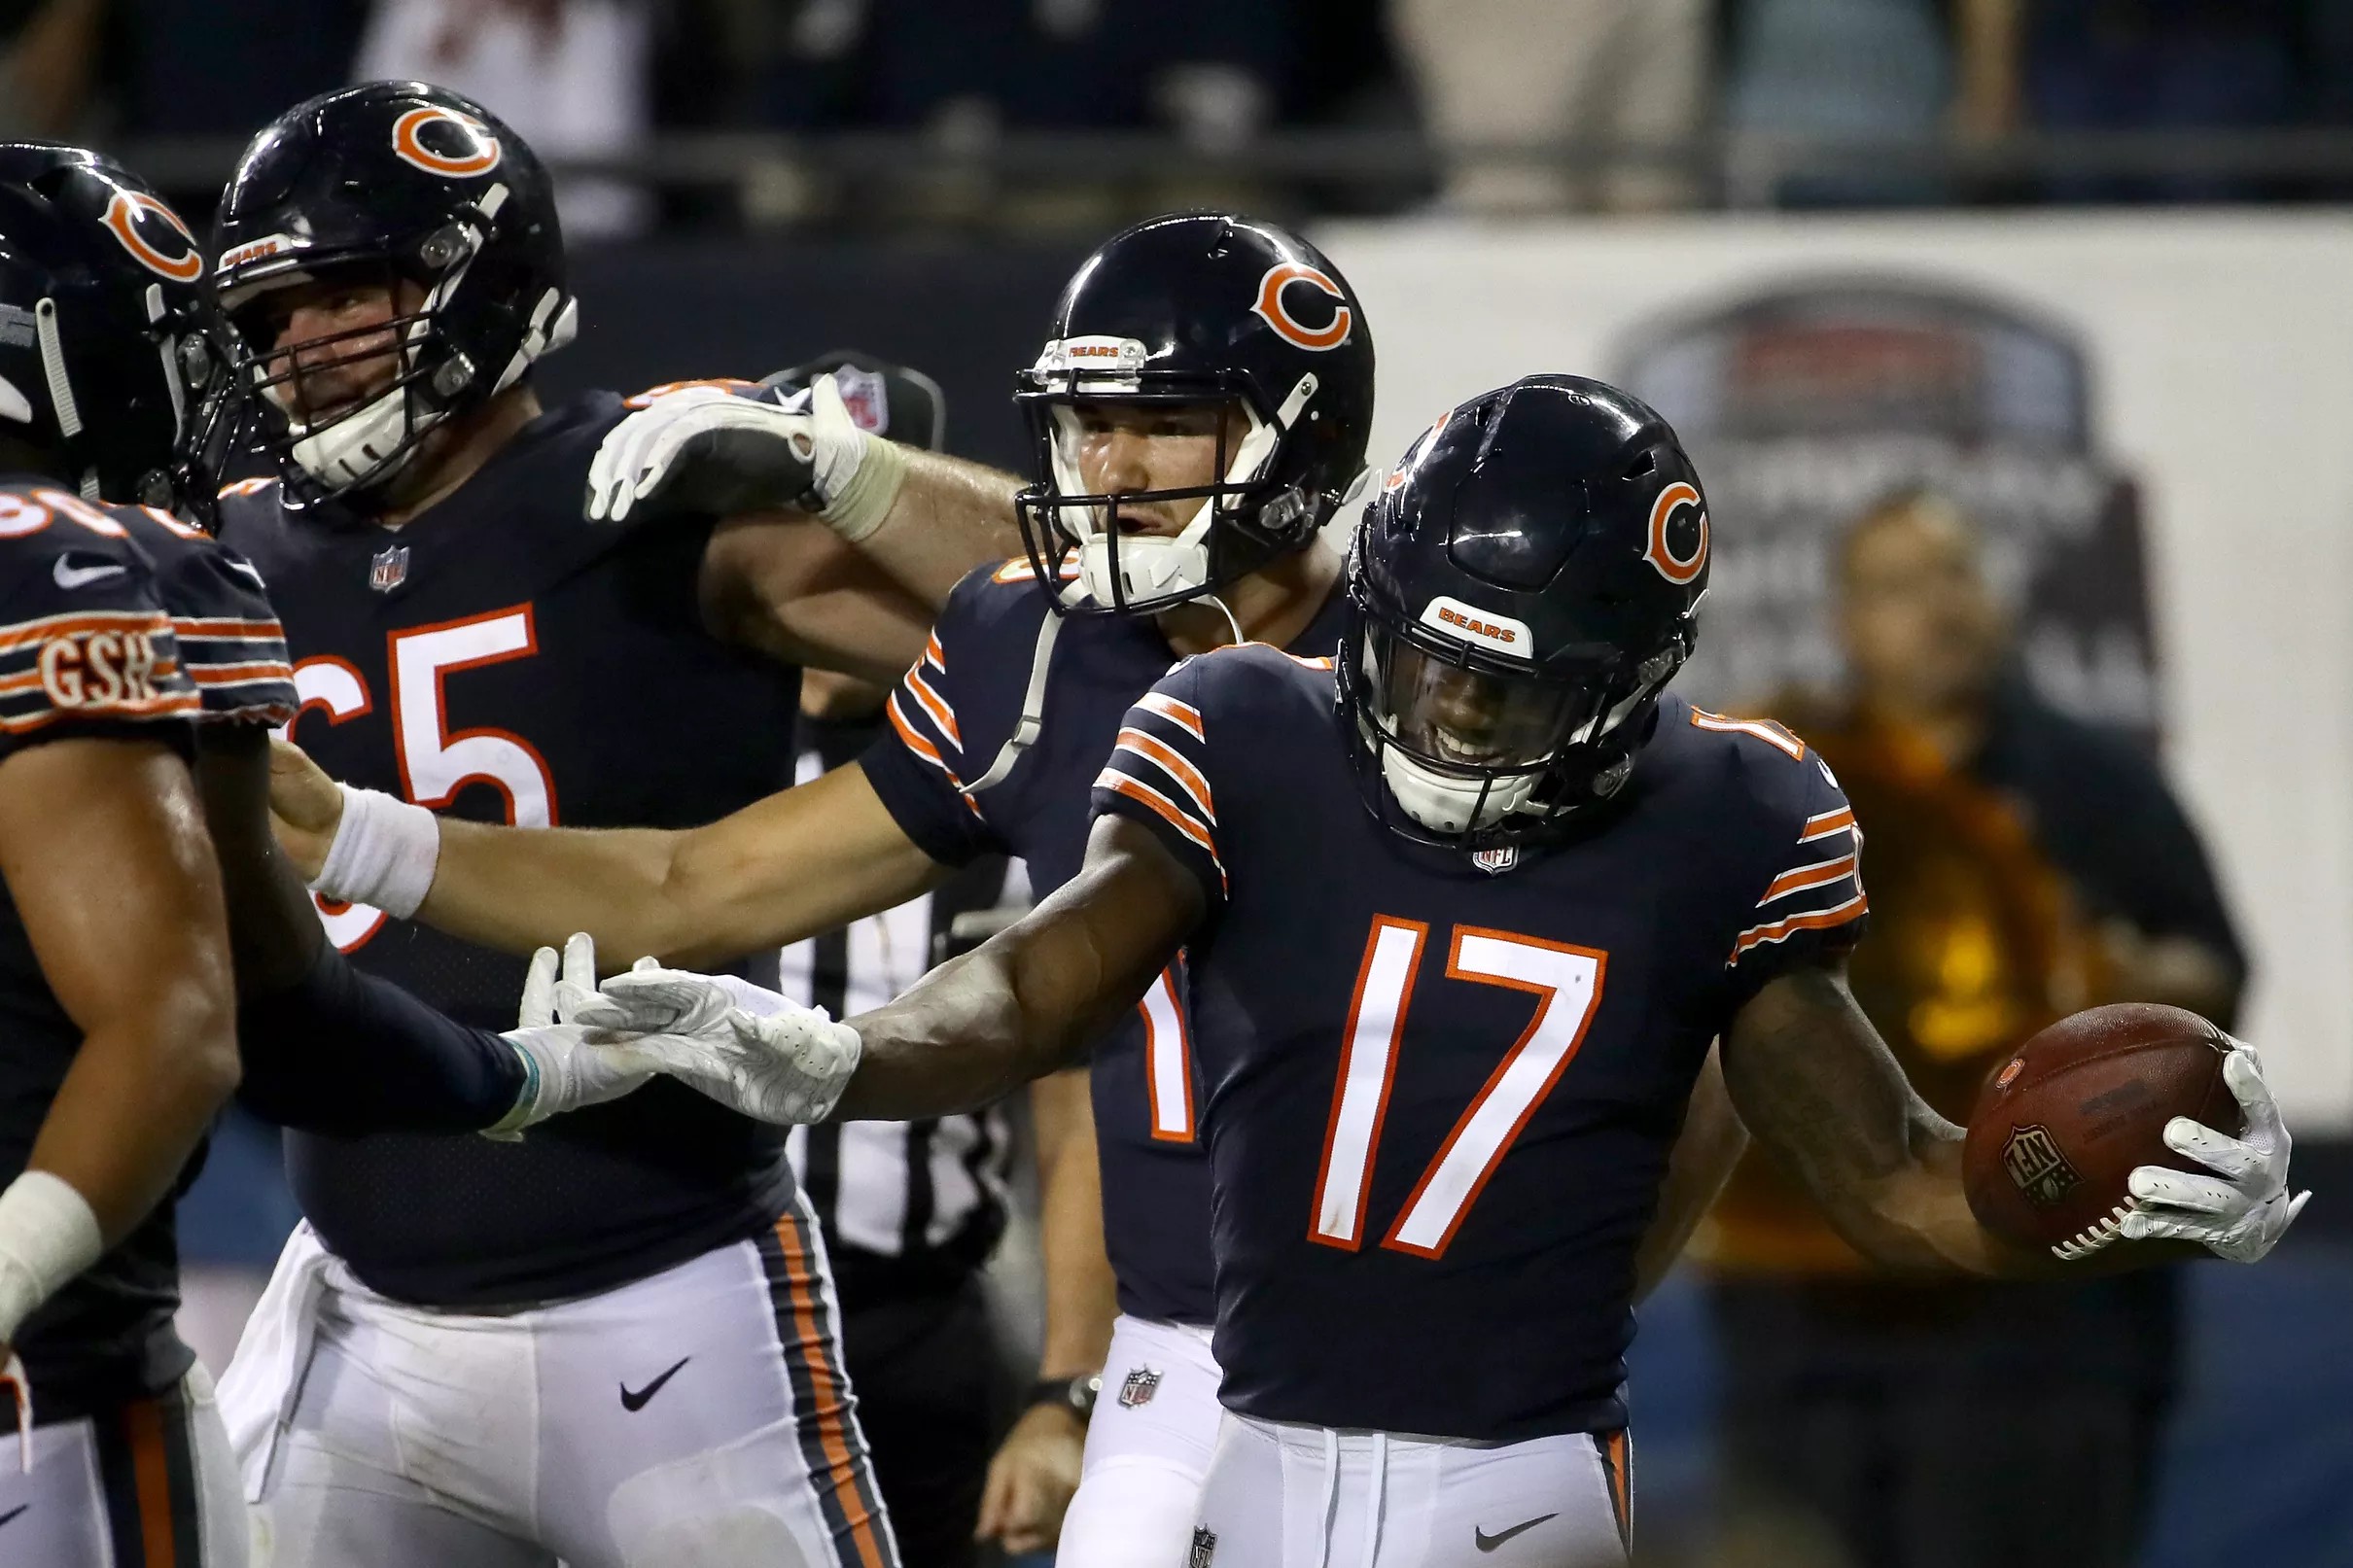 Bears vs. Seahawks Notes from a triumphant 2417 victory